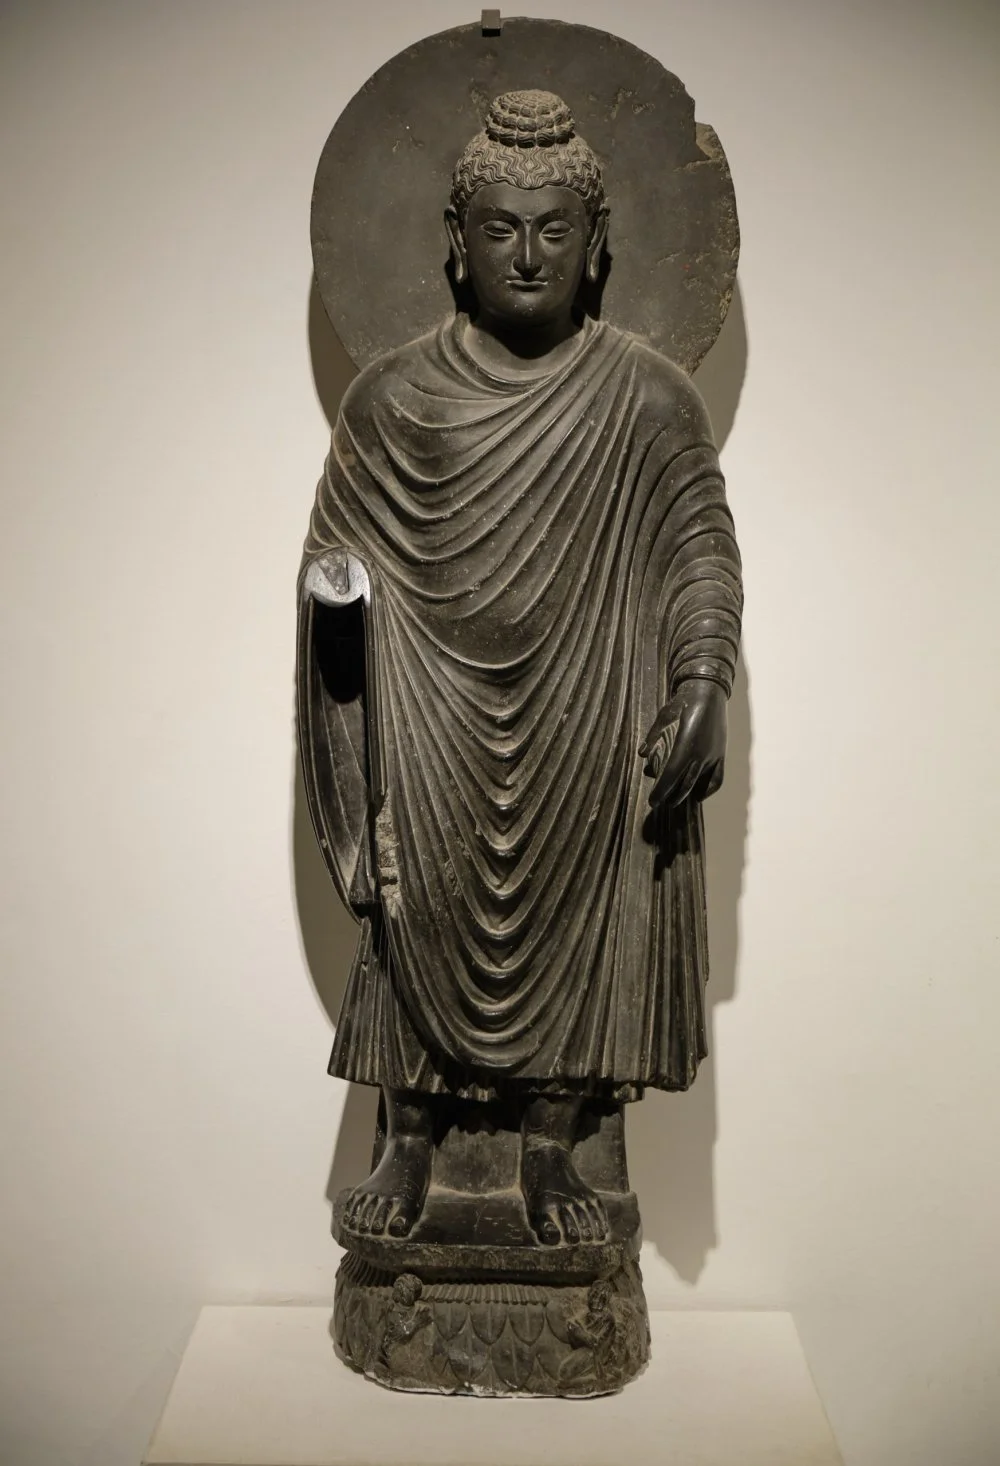 A greco-buddhist statue of a standing Buddha. The National Museum of India in New Delhi, India. 2nd century AD/Shutterstock